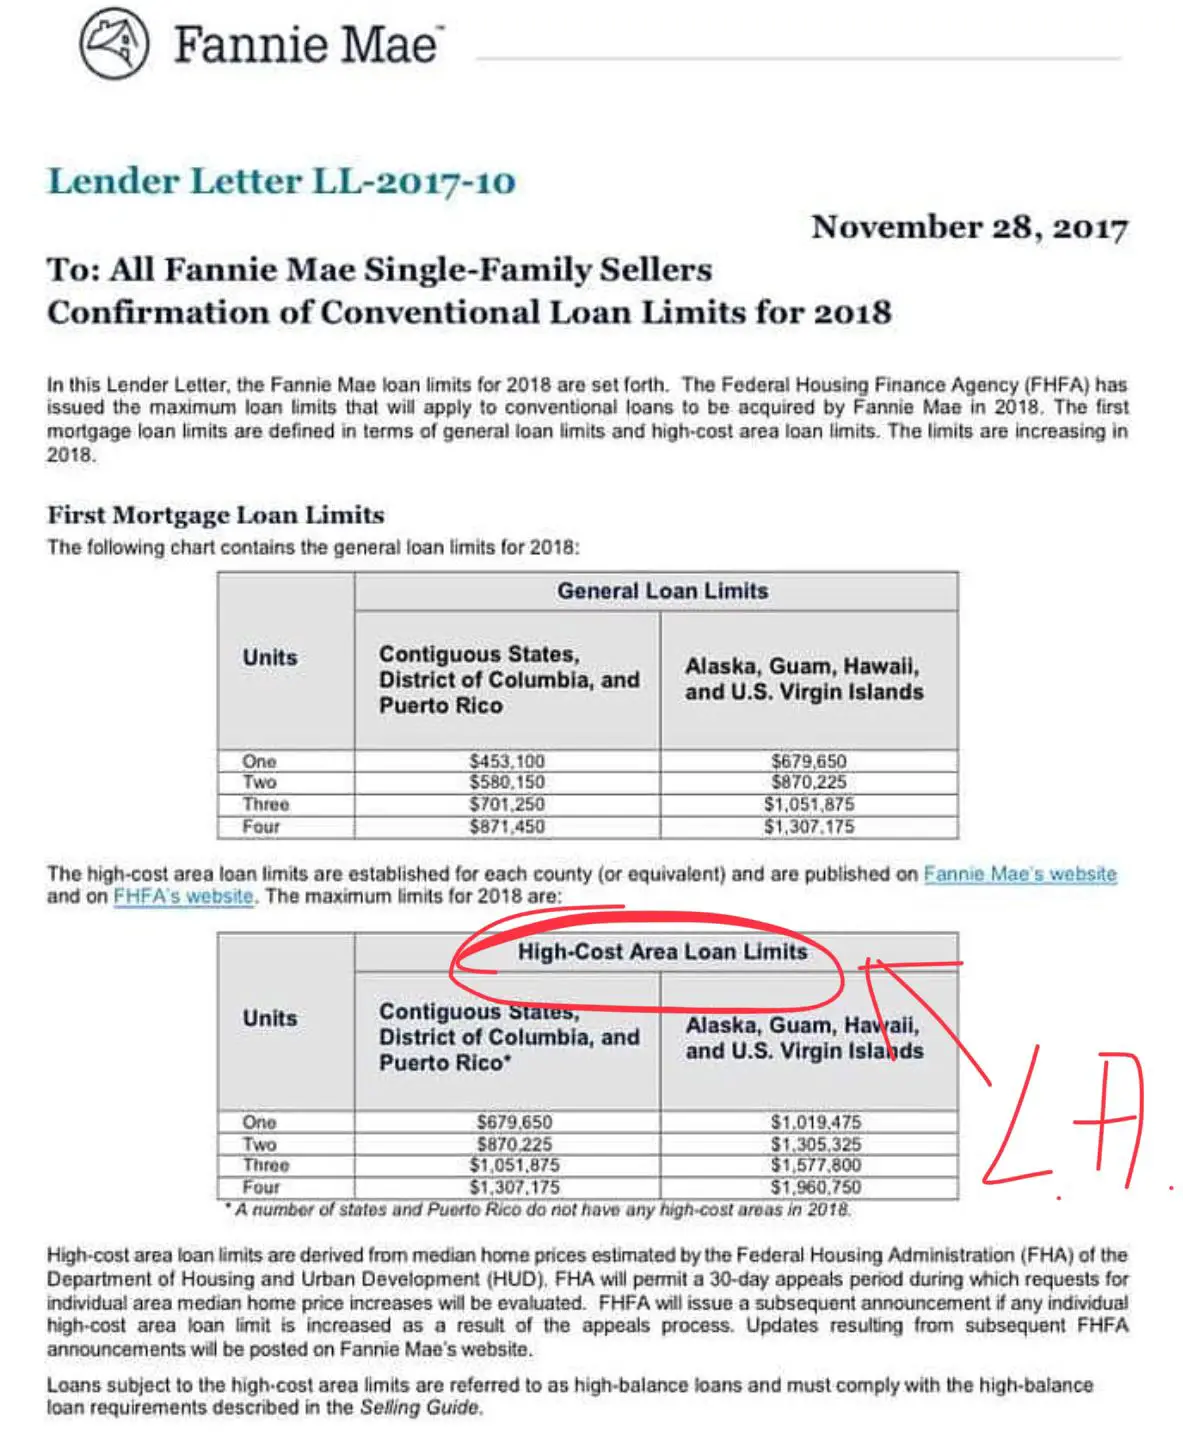 How Much Is The Jumbo Loan Limit